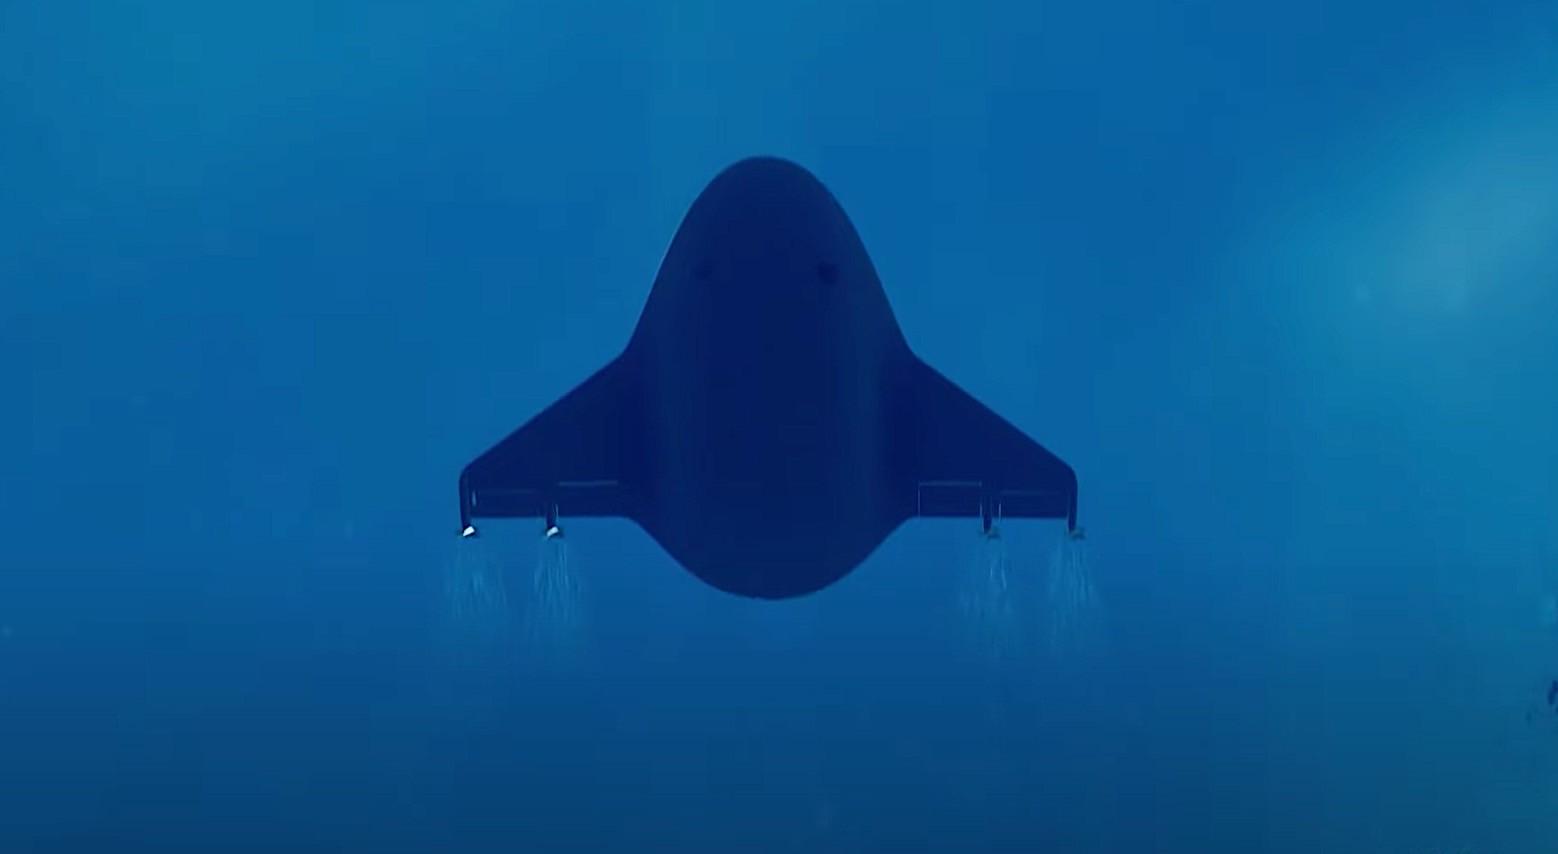 New Video Shows Military Manta Ray Drone, VR Plays a Role - autoevolution